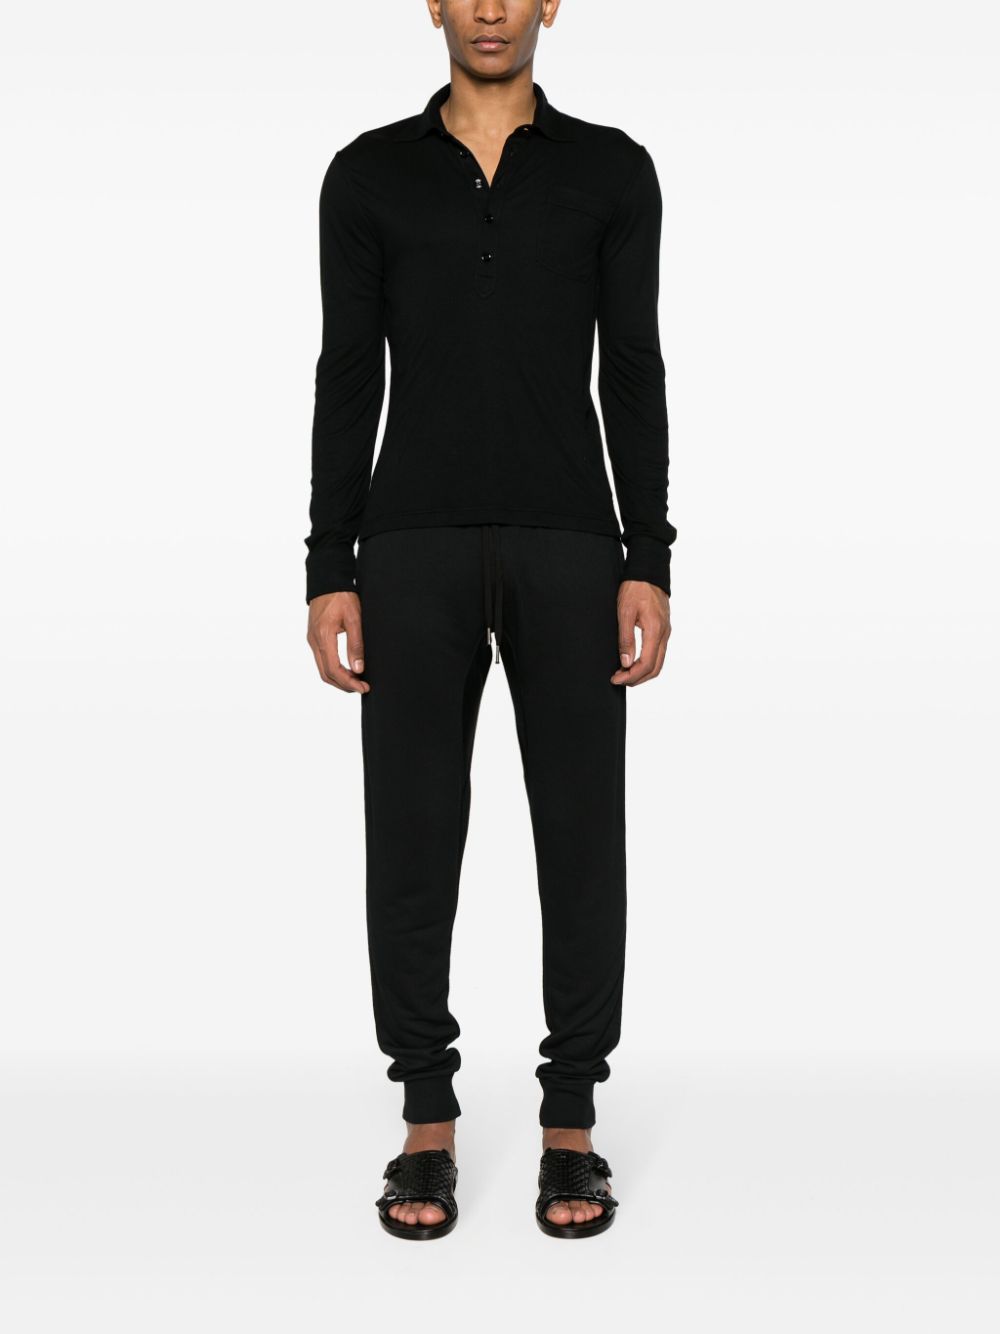 Tom Ford Trousers Black